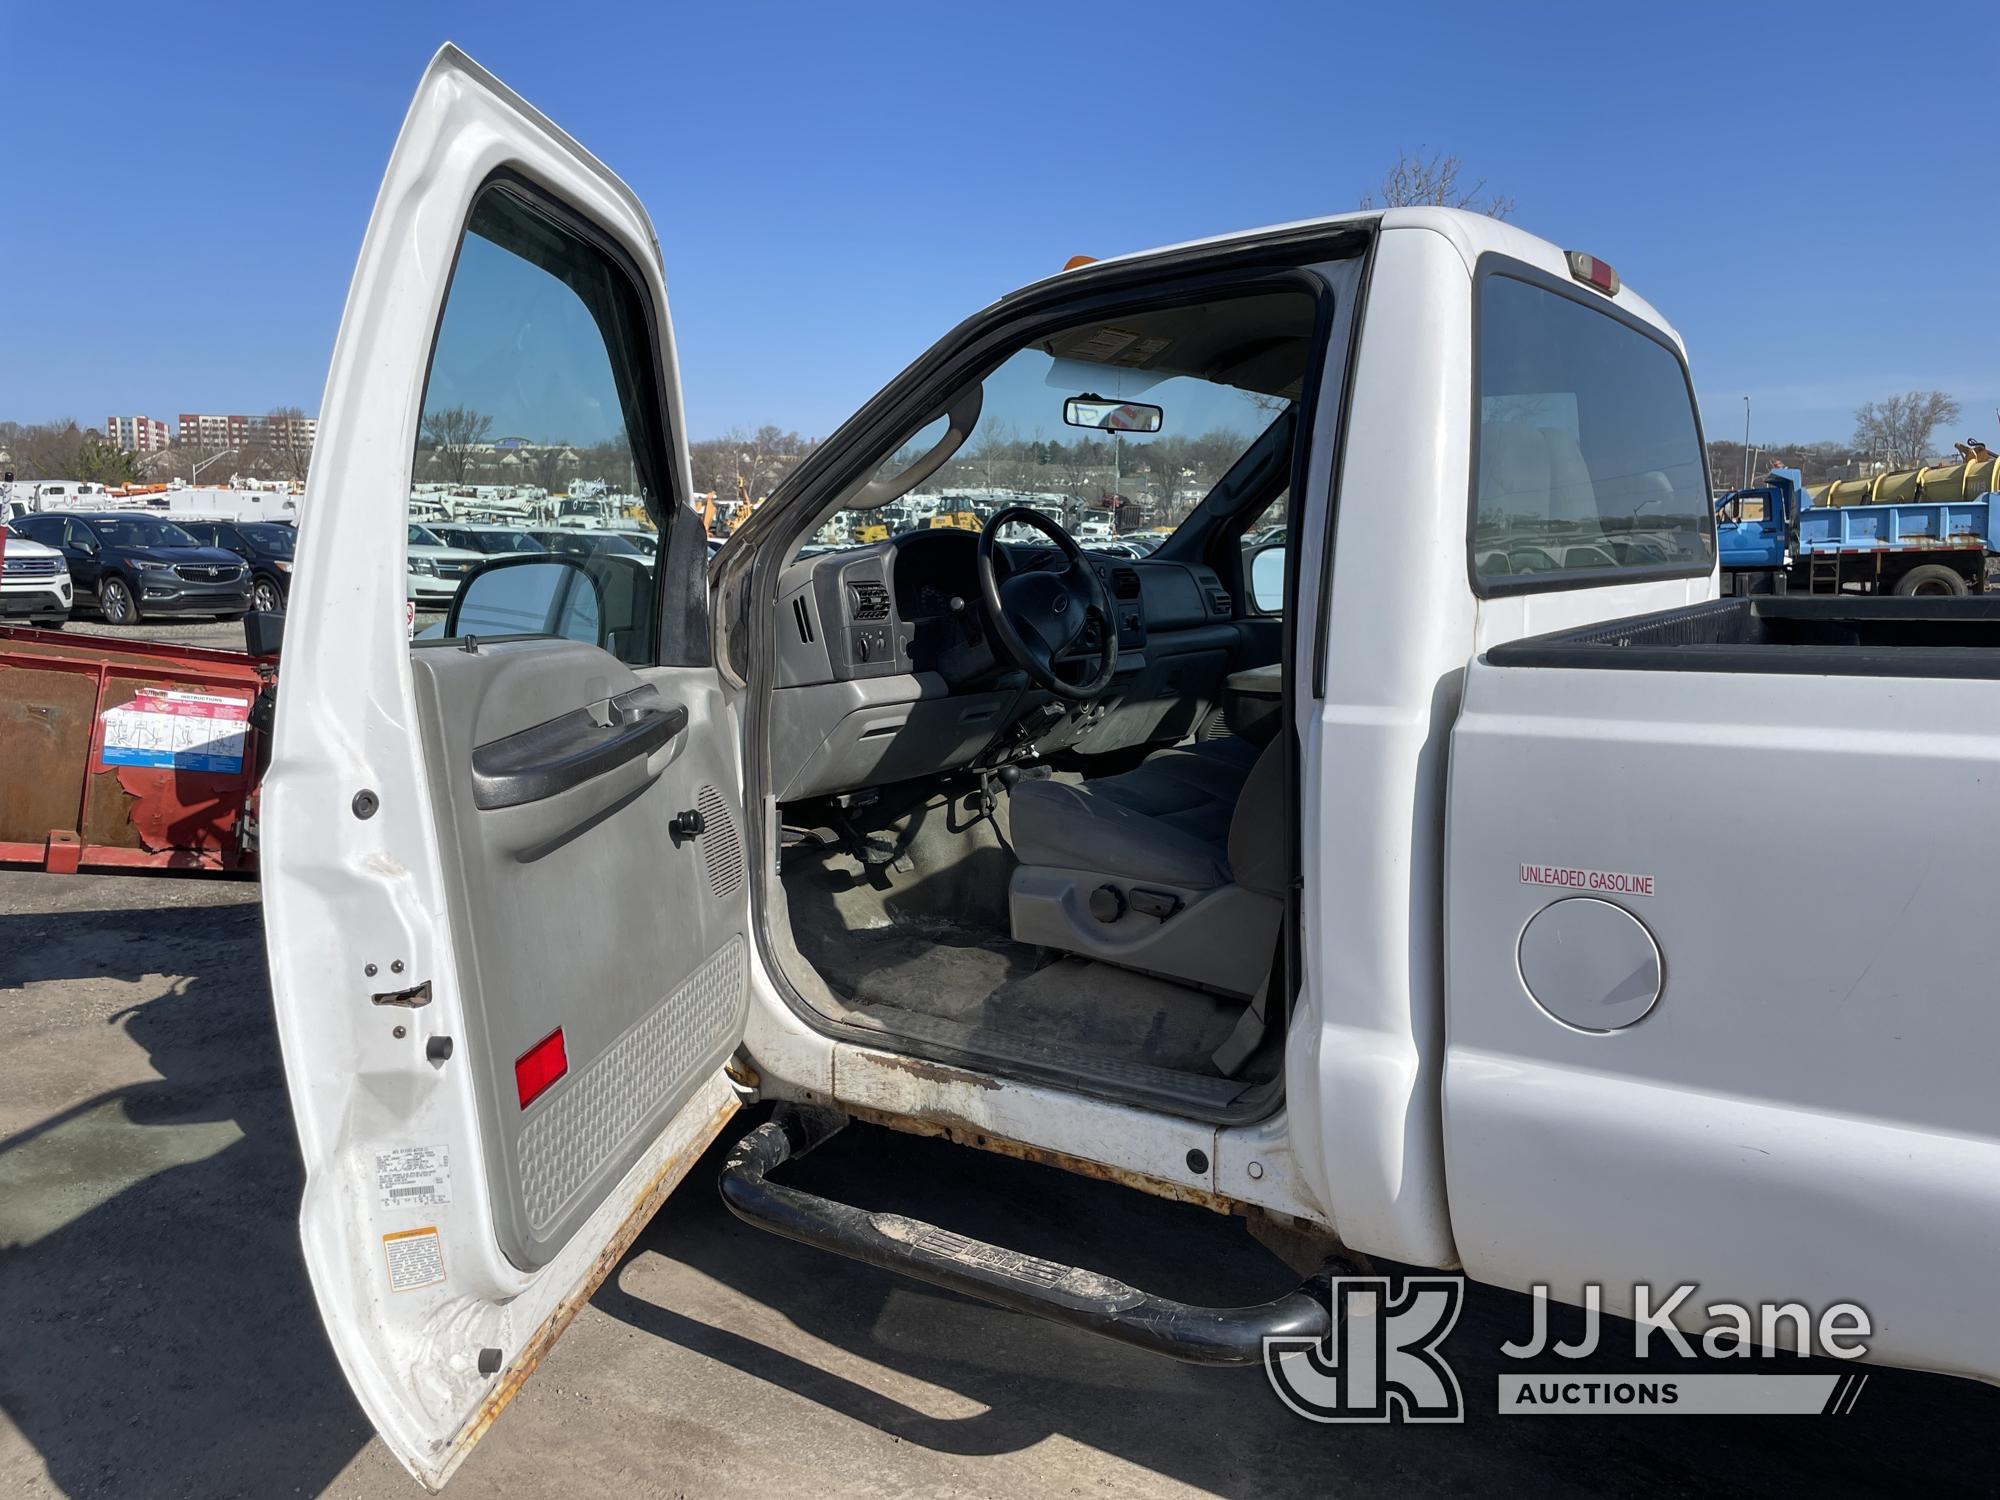 (Plymouth Meeting, PA) 2005 Ford F250 4x4 Pickup Truck Runs & Moves, Abs Light on, Body Rust Damage,